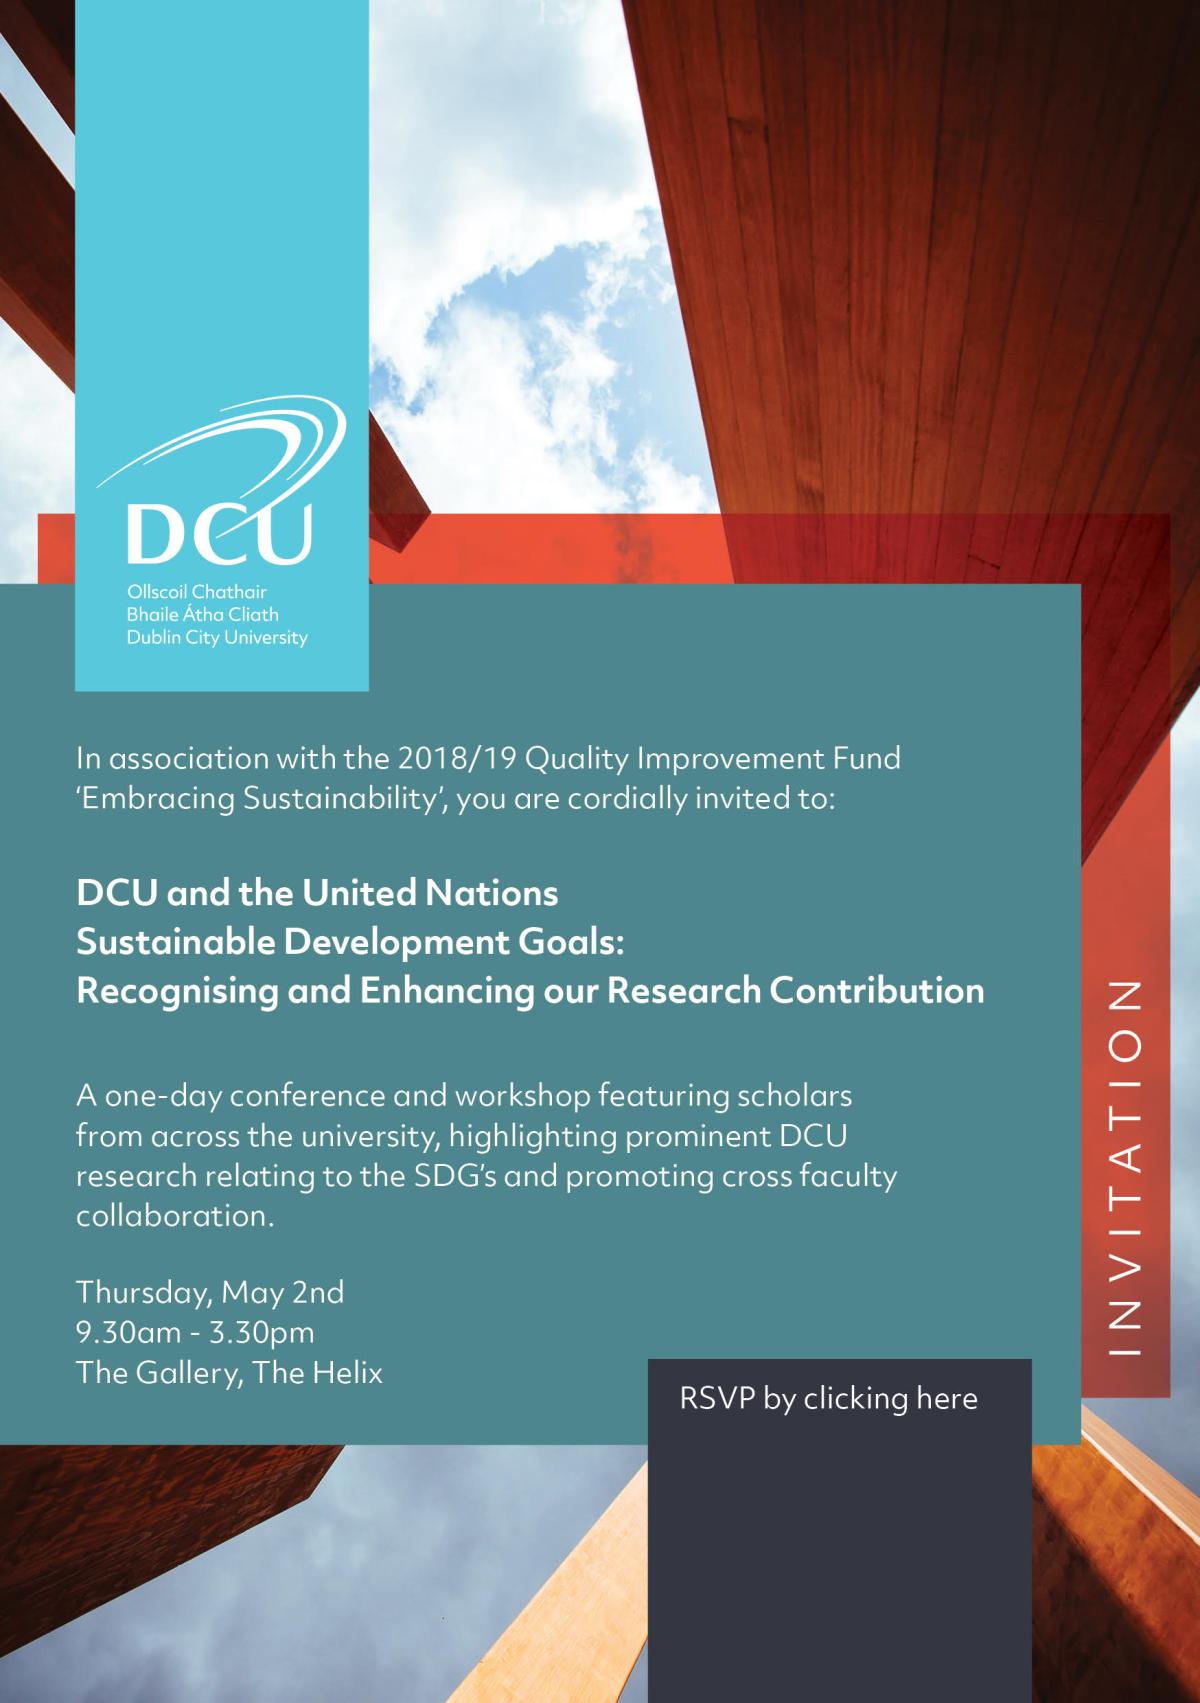 DCU and the Sustainable Development Goals